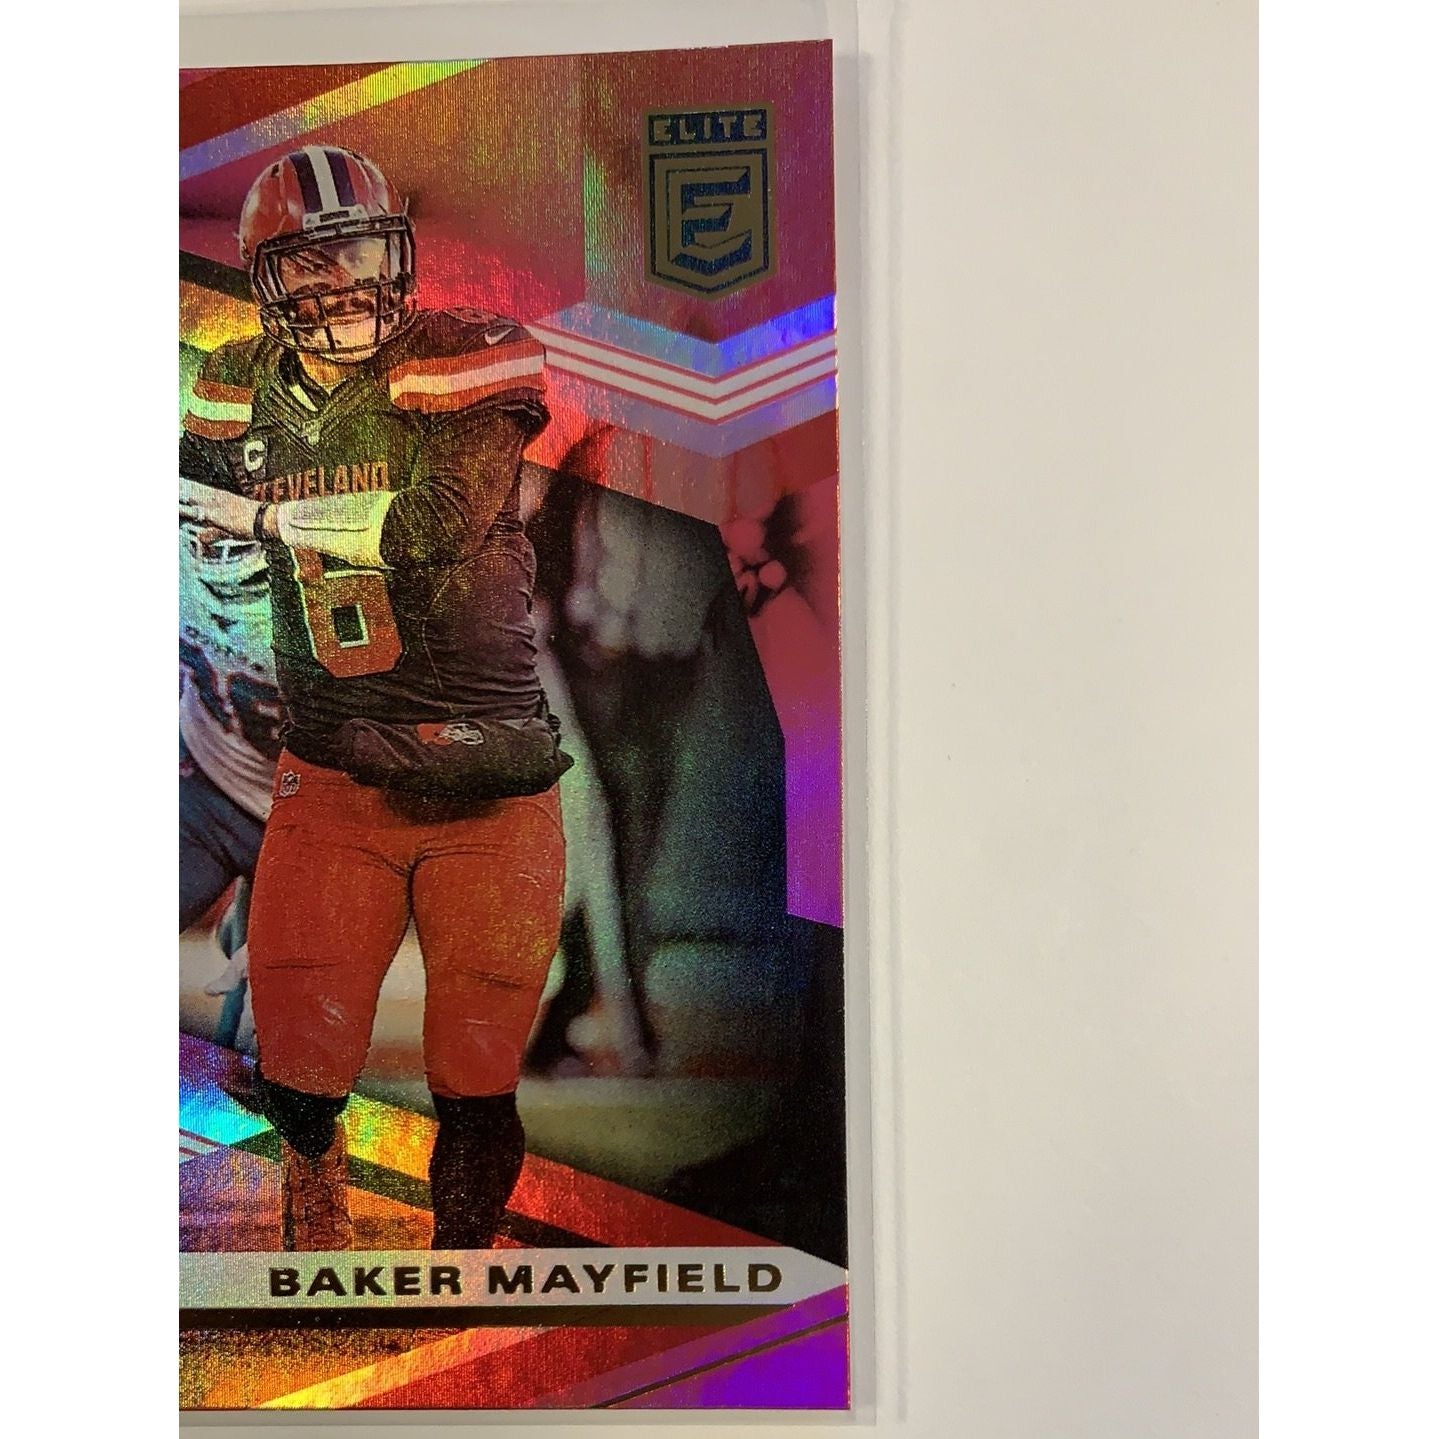  2020 Donruss Elite Baker Mayfield Pink Parallel  Local Legends Cards & Collectibles